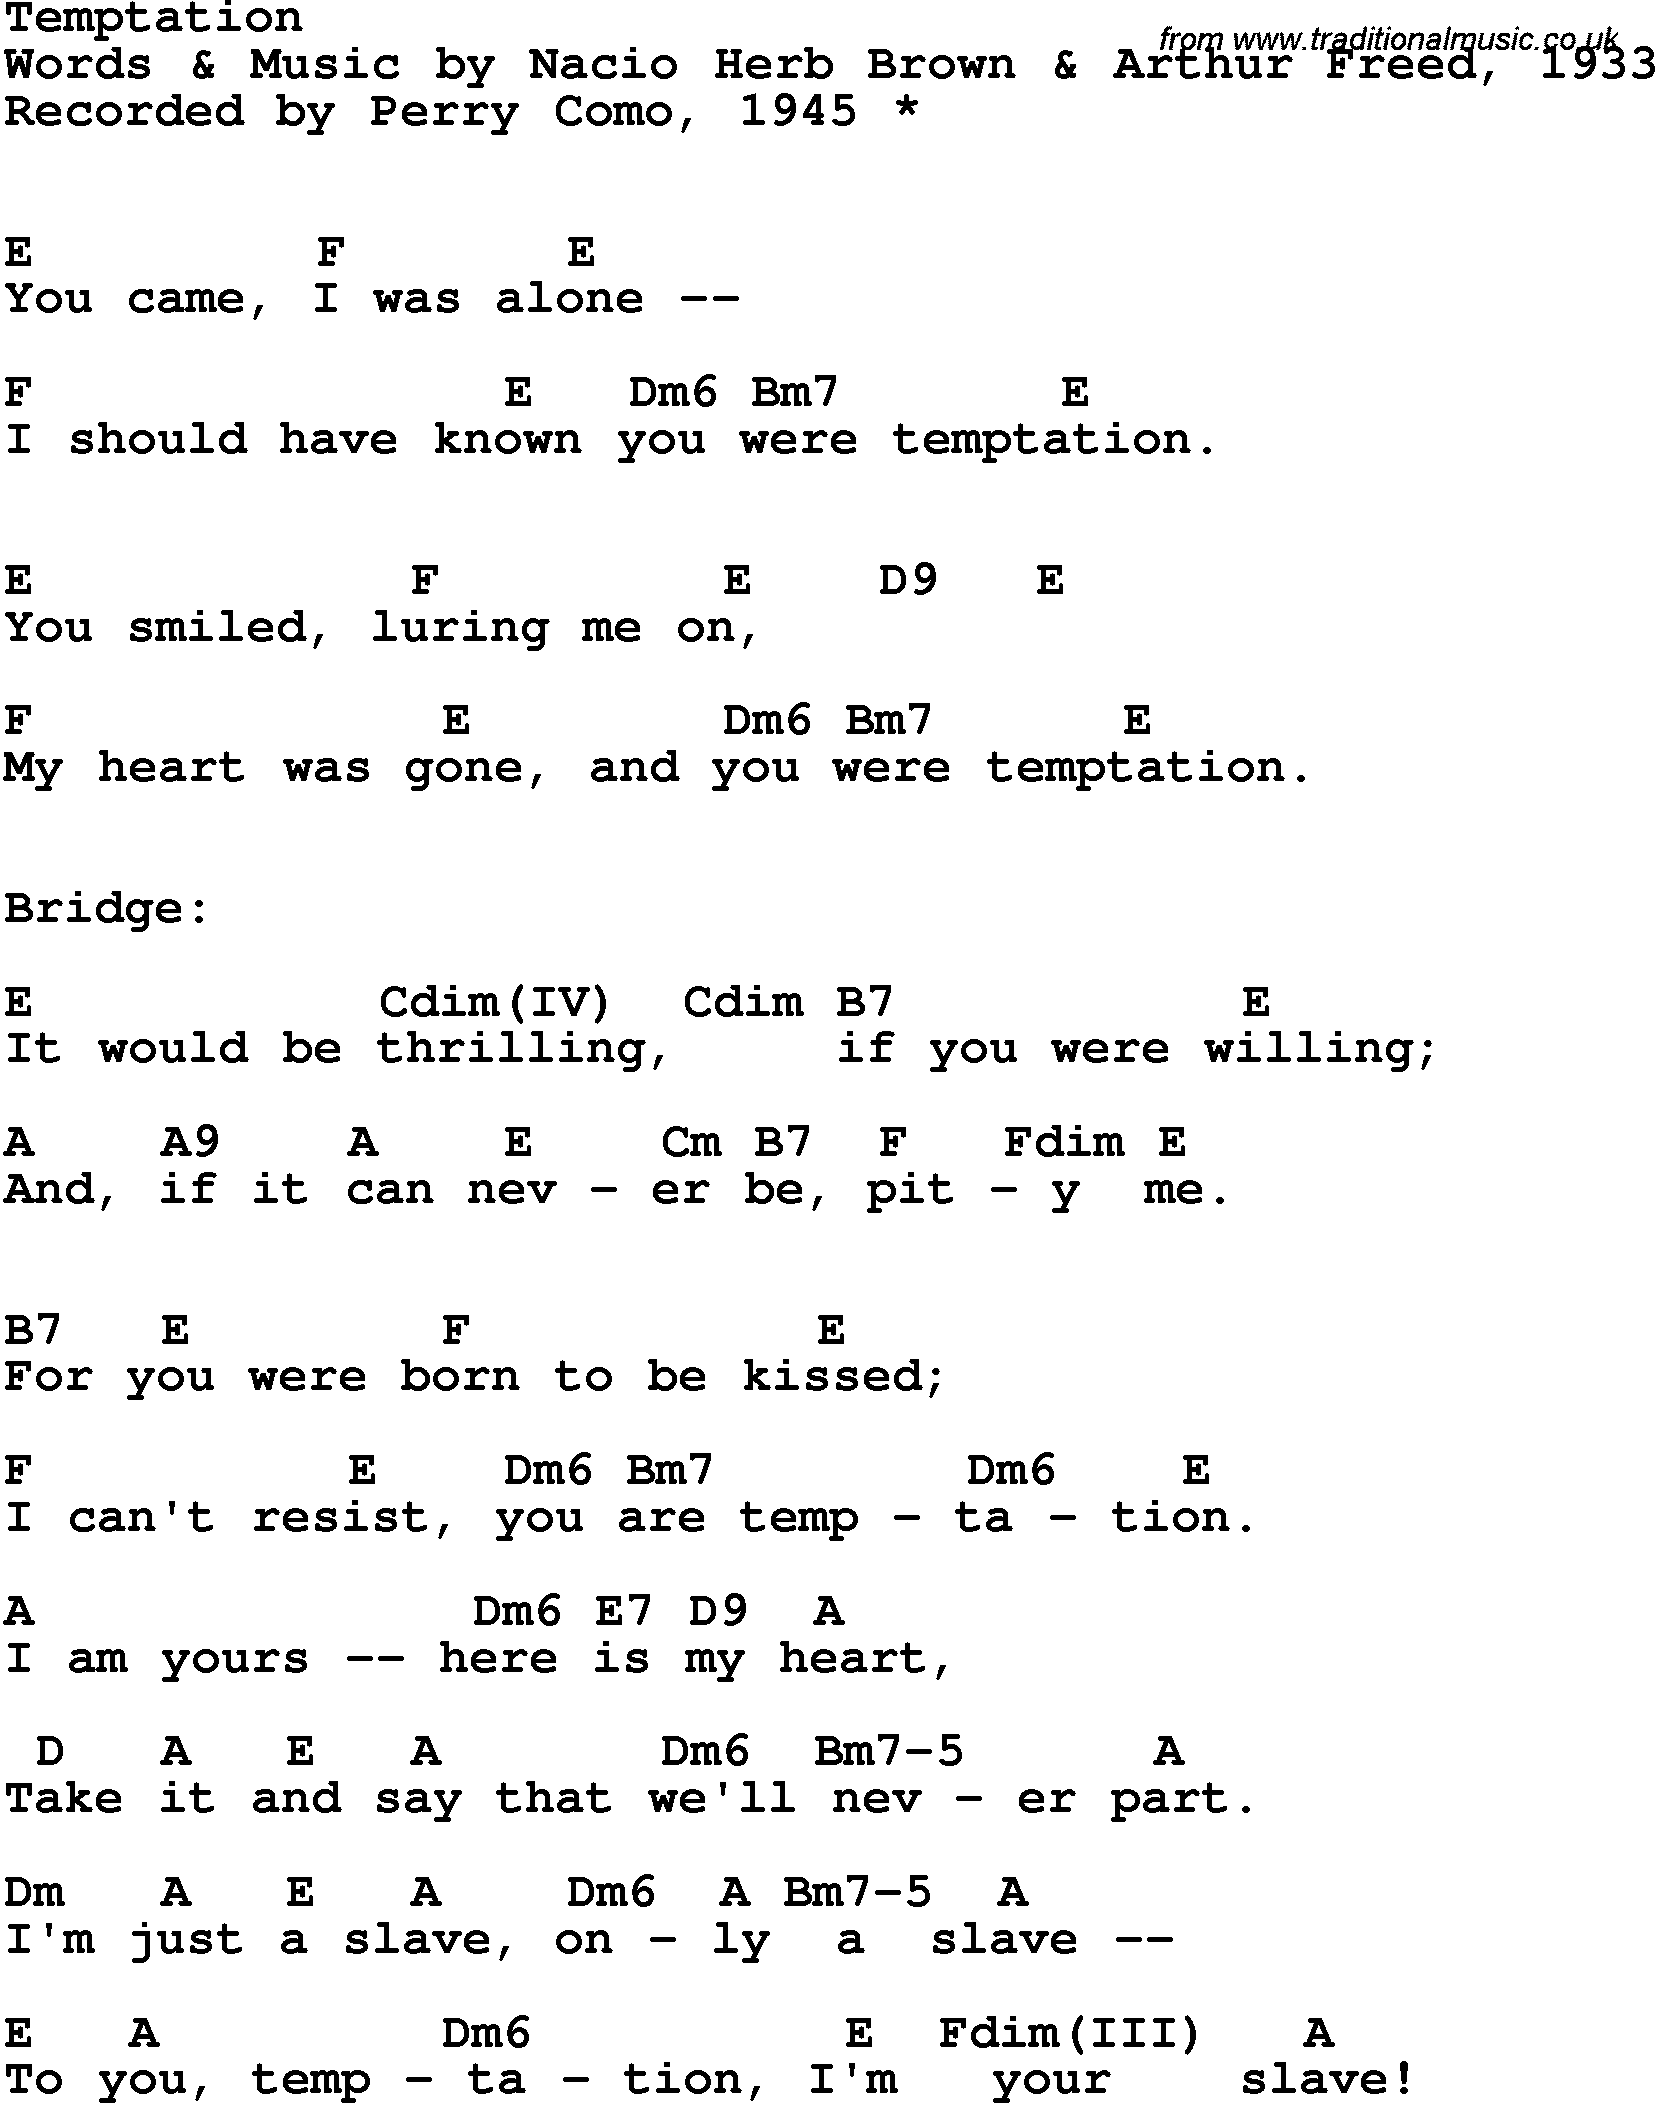 Song Lyrics with guitar chords for Temptation - Perry Como, 1945